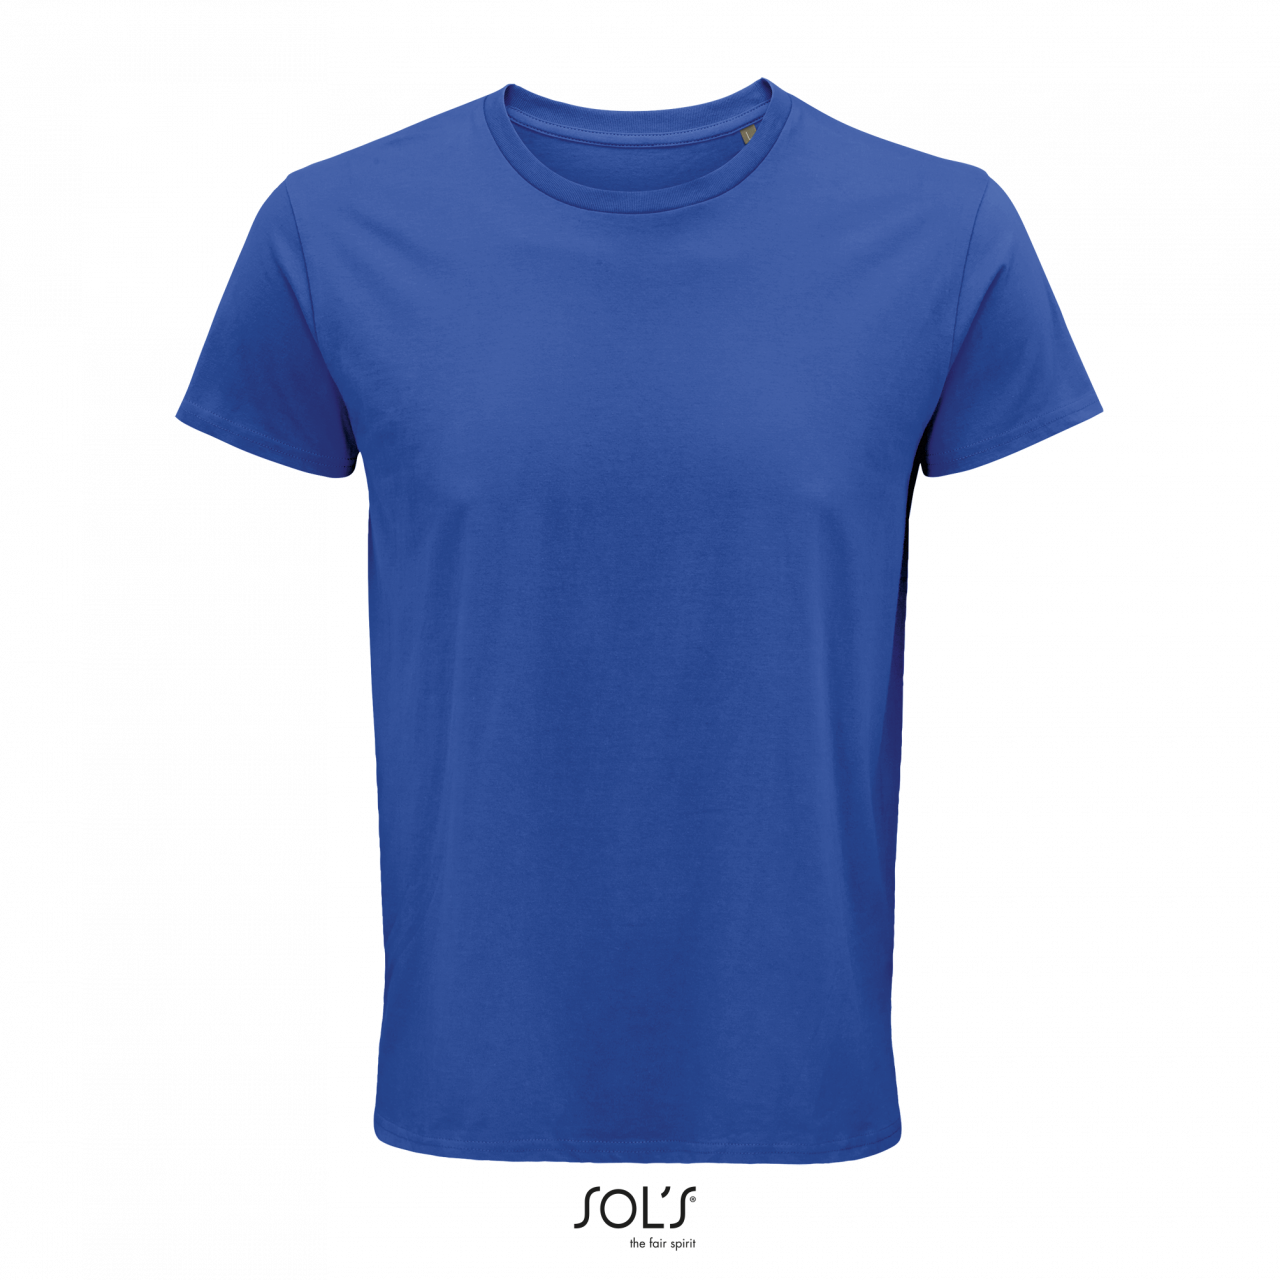 Sol's Crusader Men - Round-neck Fitted Jersey T-shirt - Sol's Crusader Men - Round-neck Fitted Jersey T-shirt - Royal